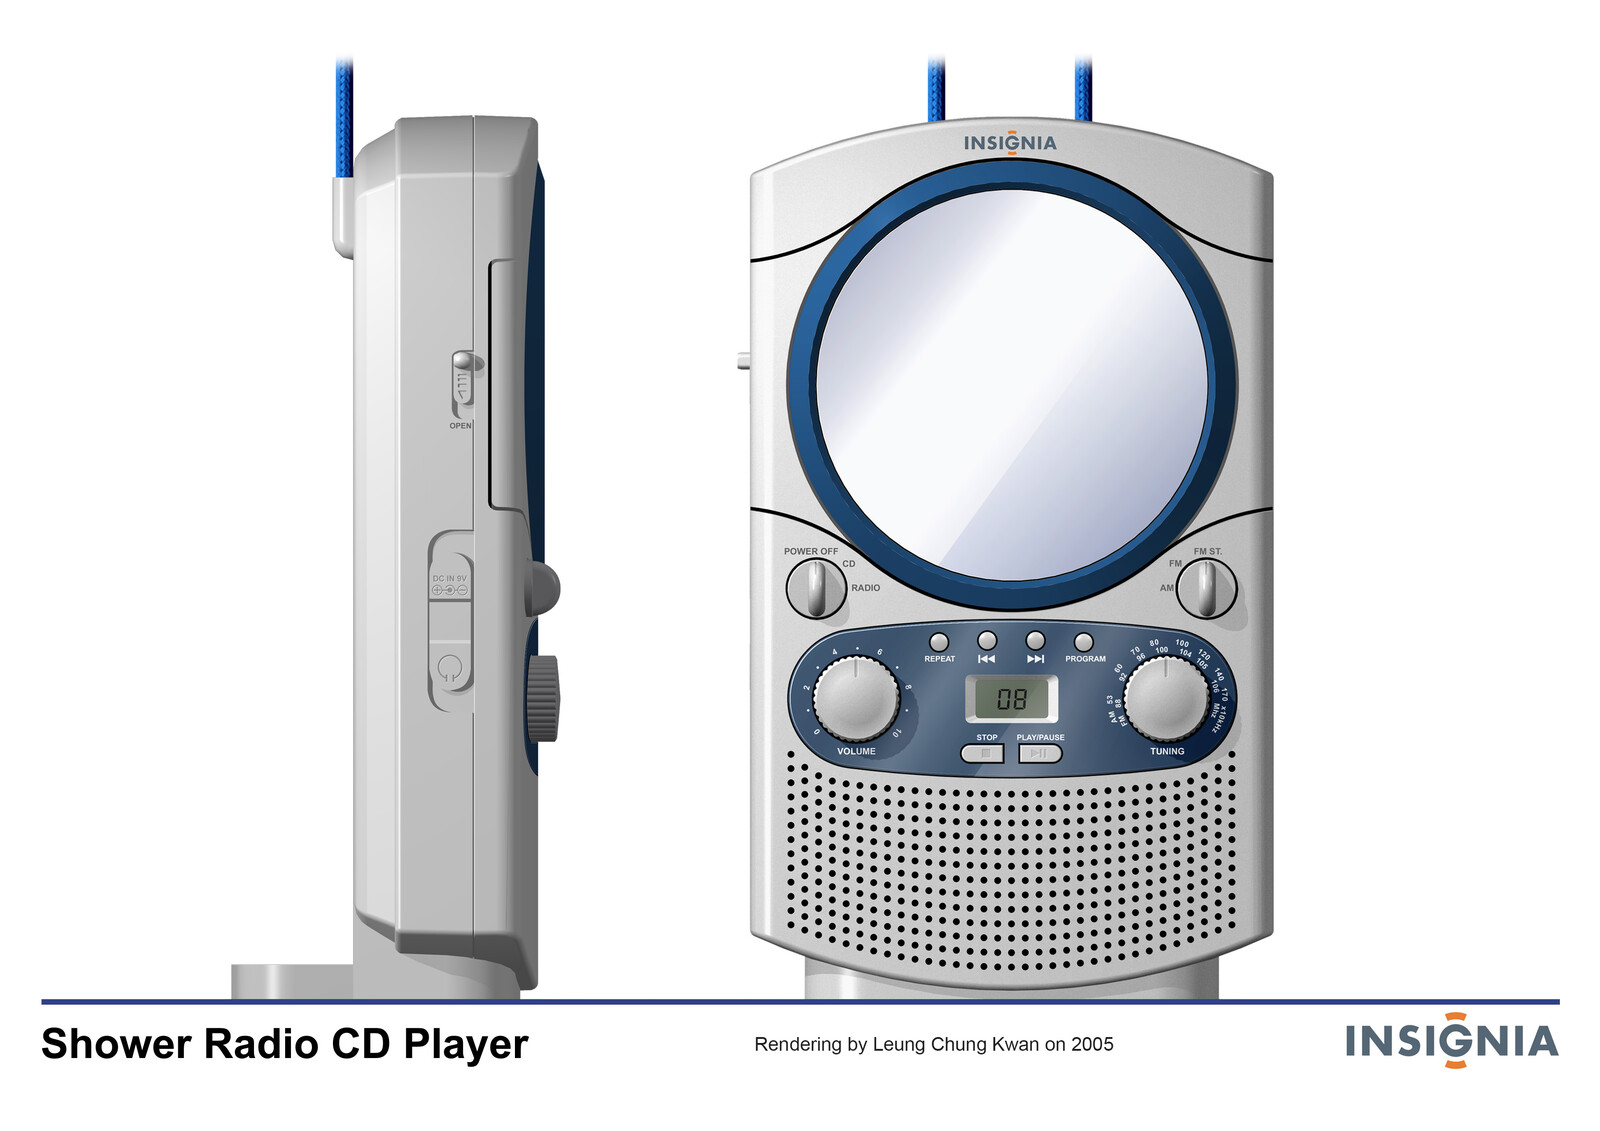 💎 Shower Radio CD Player | Rendering by Leung Chung Kwan on 2005 💎
Brand Name︰INSIGNA | Client︰Star Light Electronics Co., Ltd.
